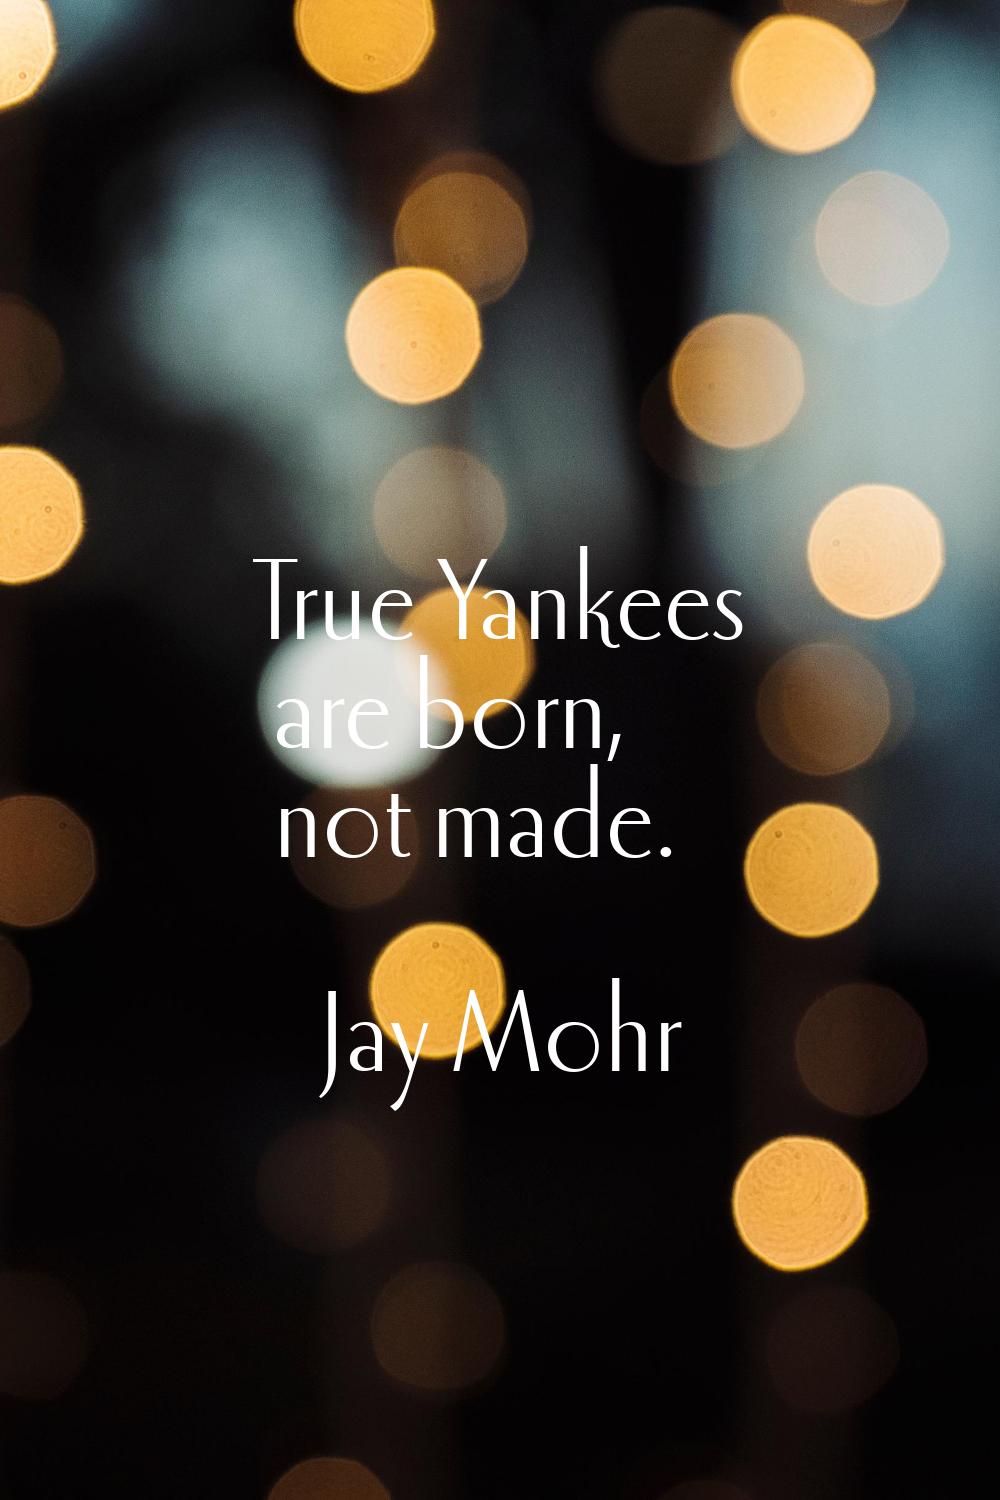 True Yankees are born, not made.